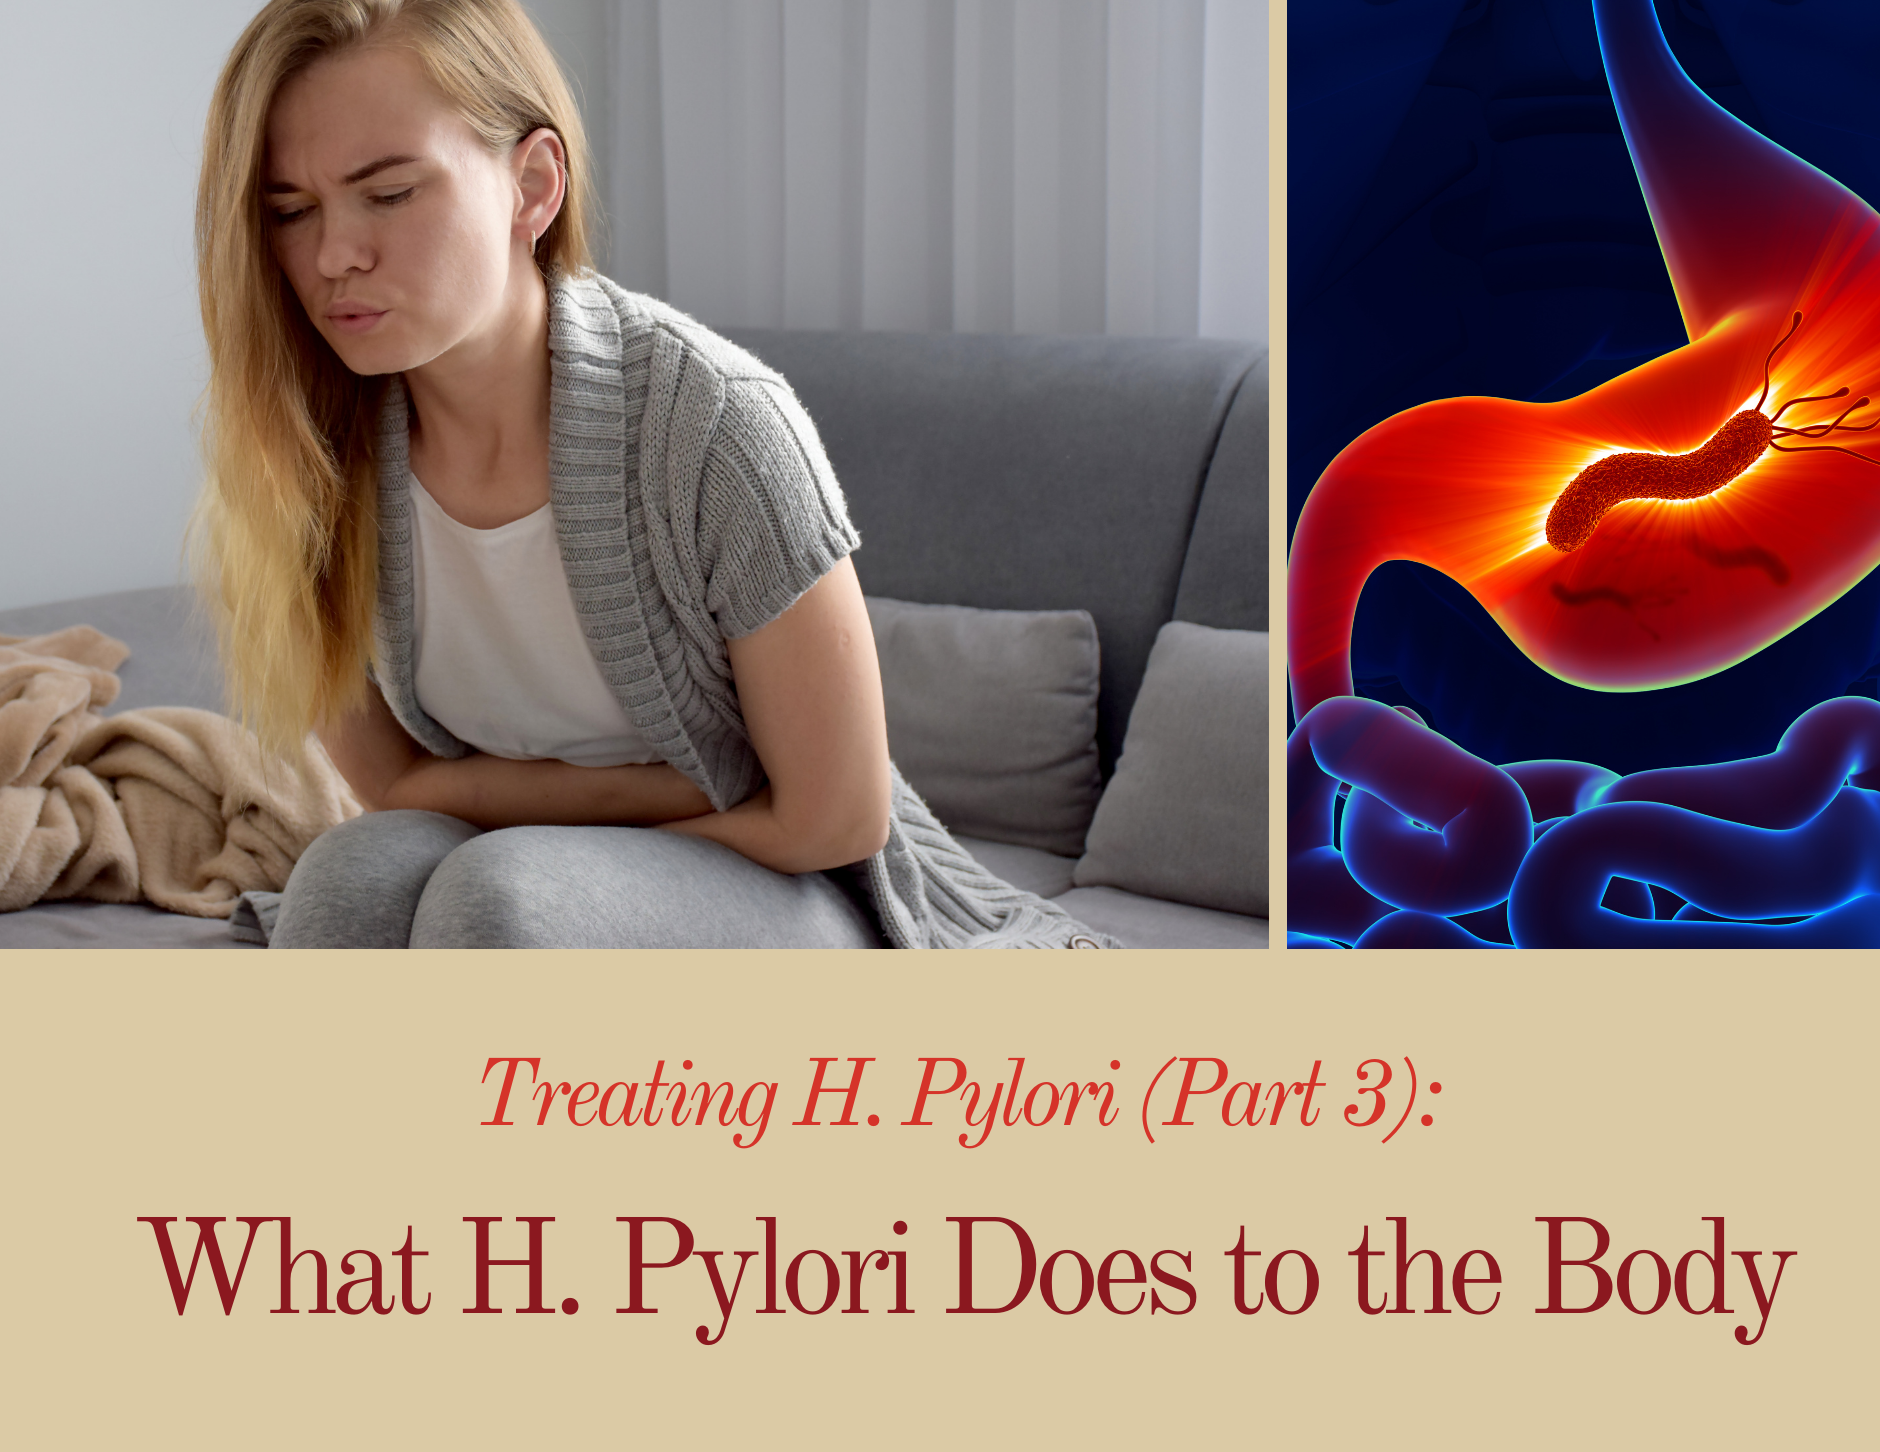 Treating H. Pylori (Part 3): What H. Pylori Does to the Body